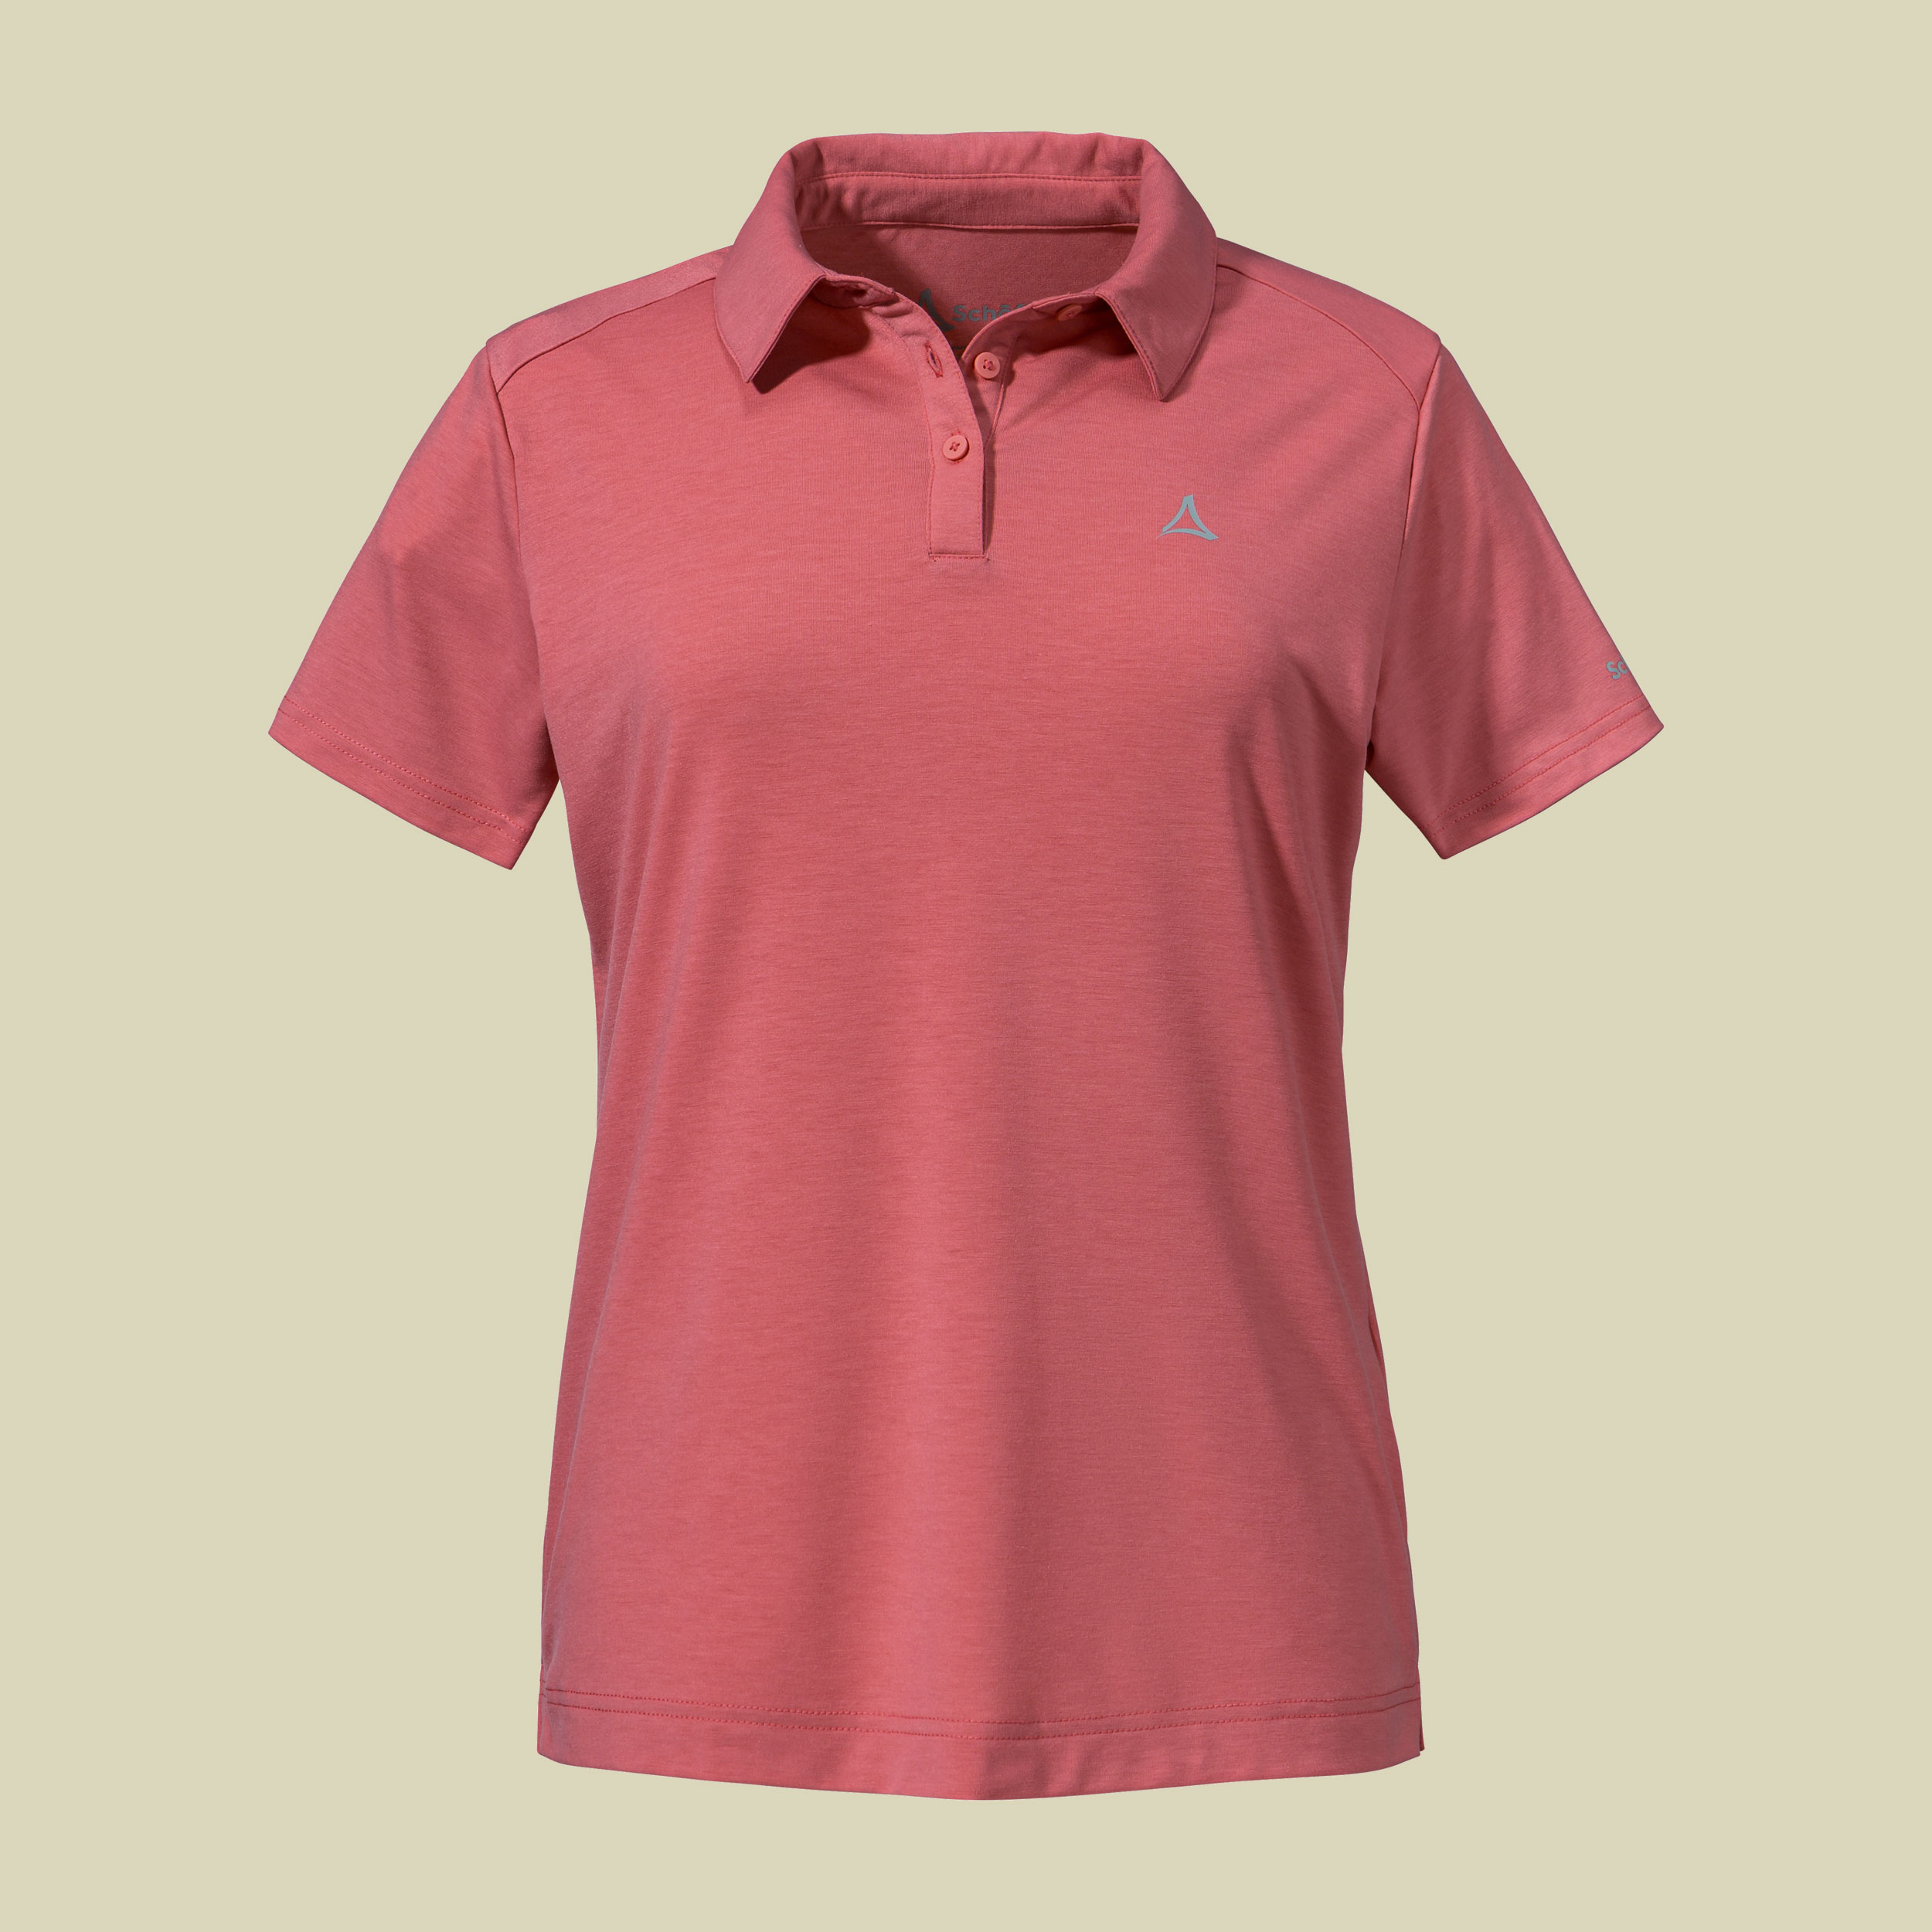 Polo Shirt Ramseck L Women 42 rot - clasping rose